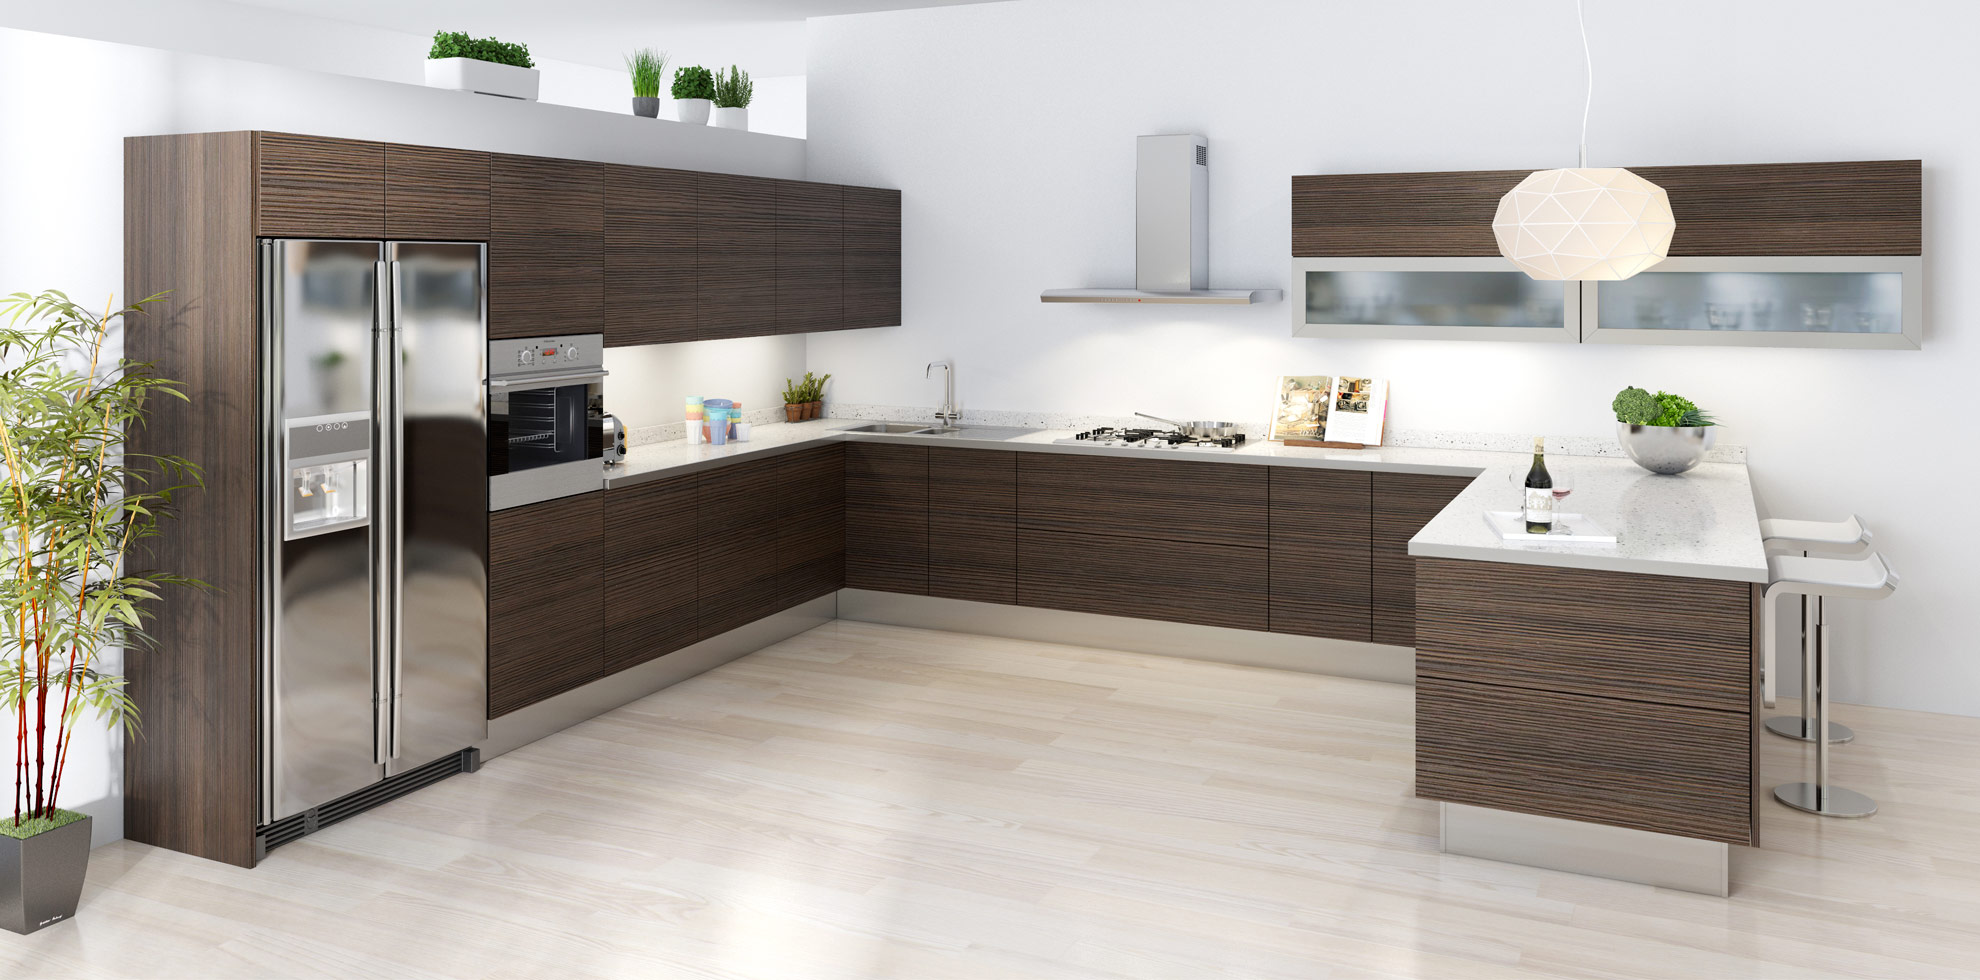 The Kitchen Blog, Affordable Contemporary Kitchen Cabinets